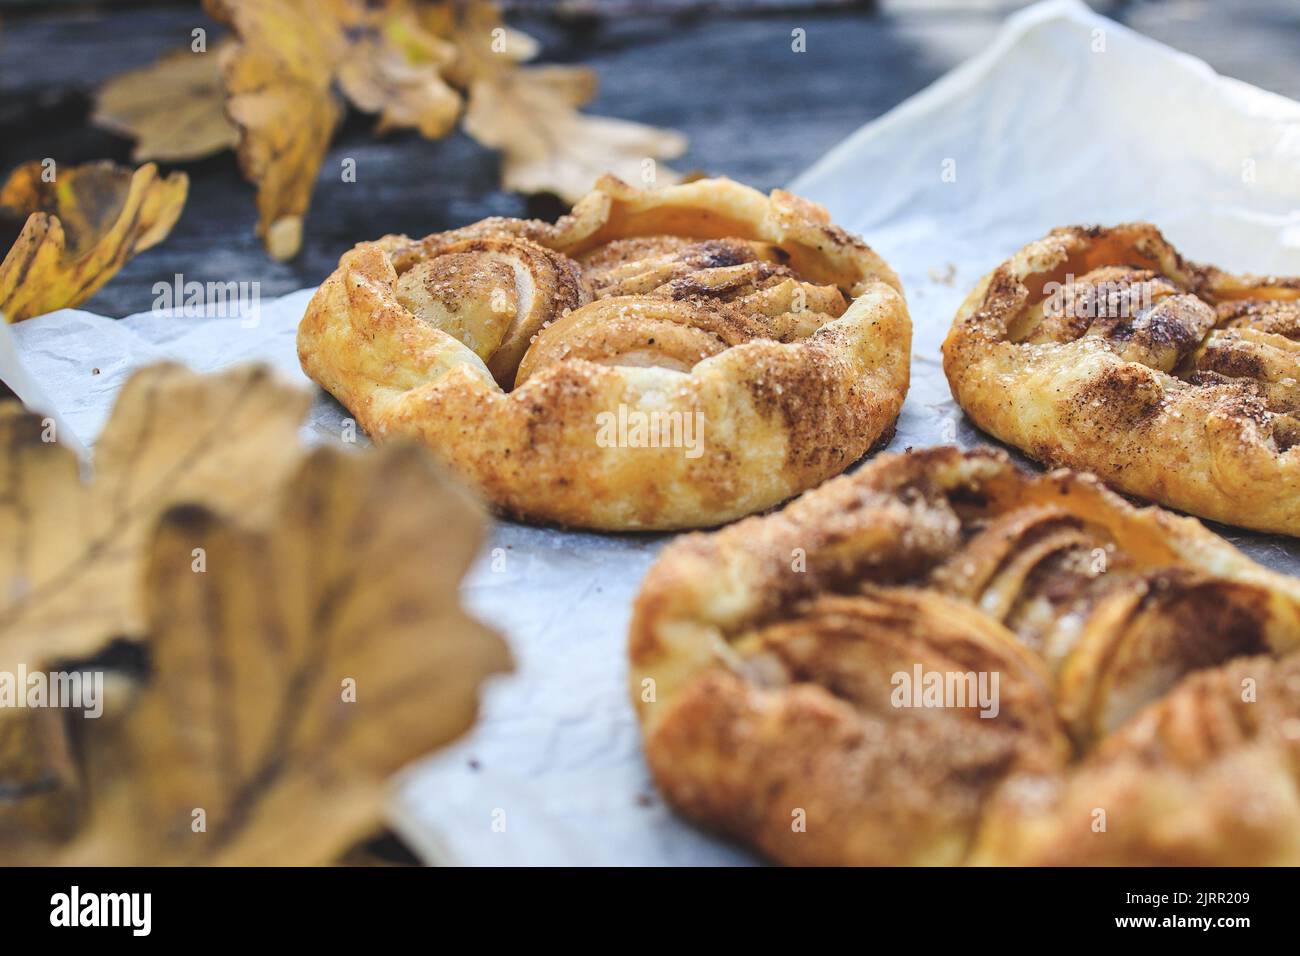 rustic traditional french biscuit cake with apples in autumn style. Stock Photo